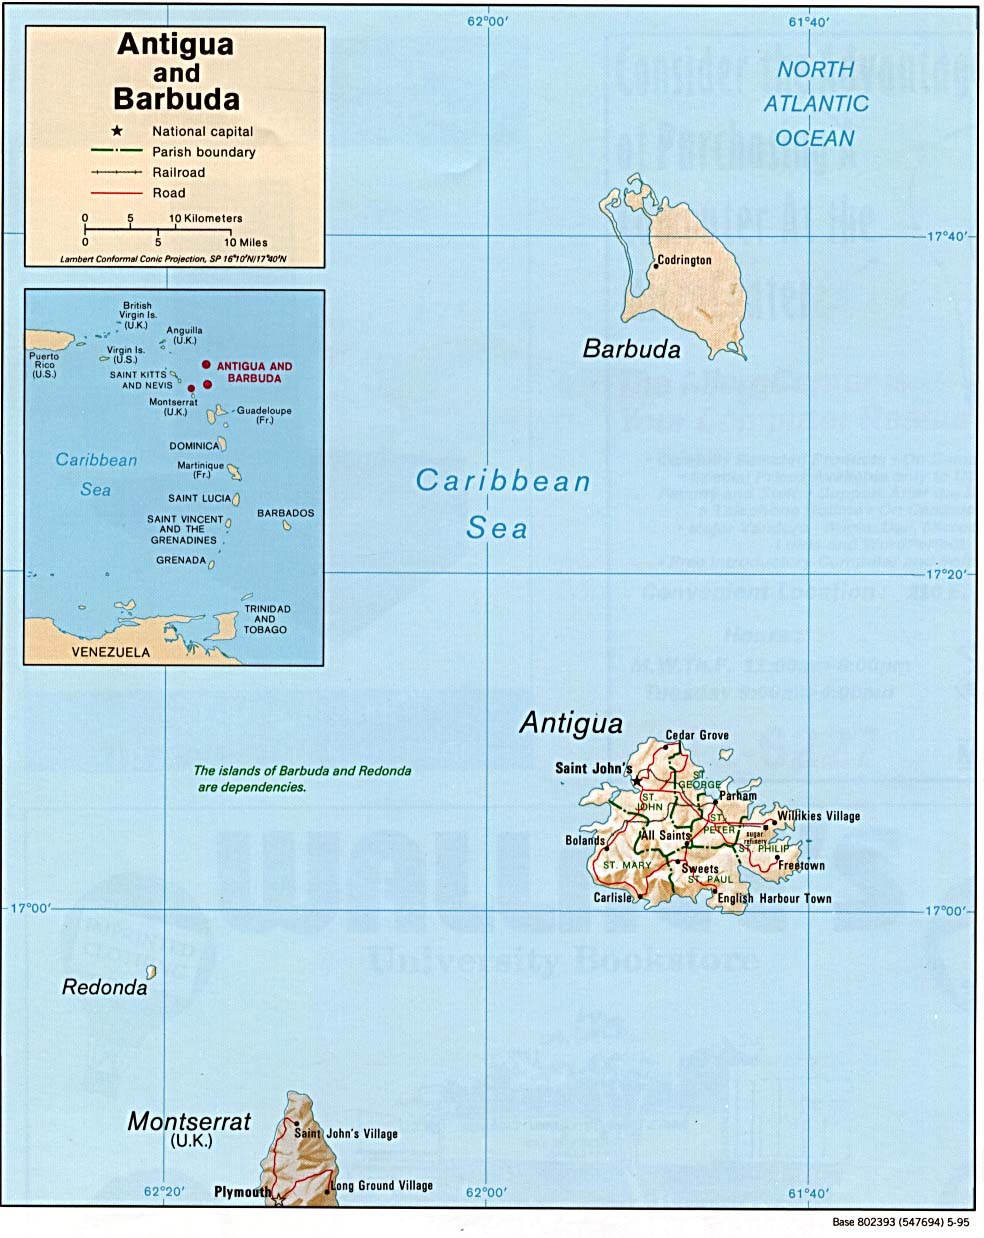 Antigua and Barbuda Shaded Relief Map